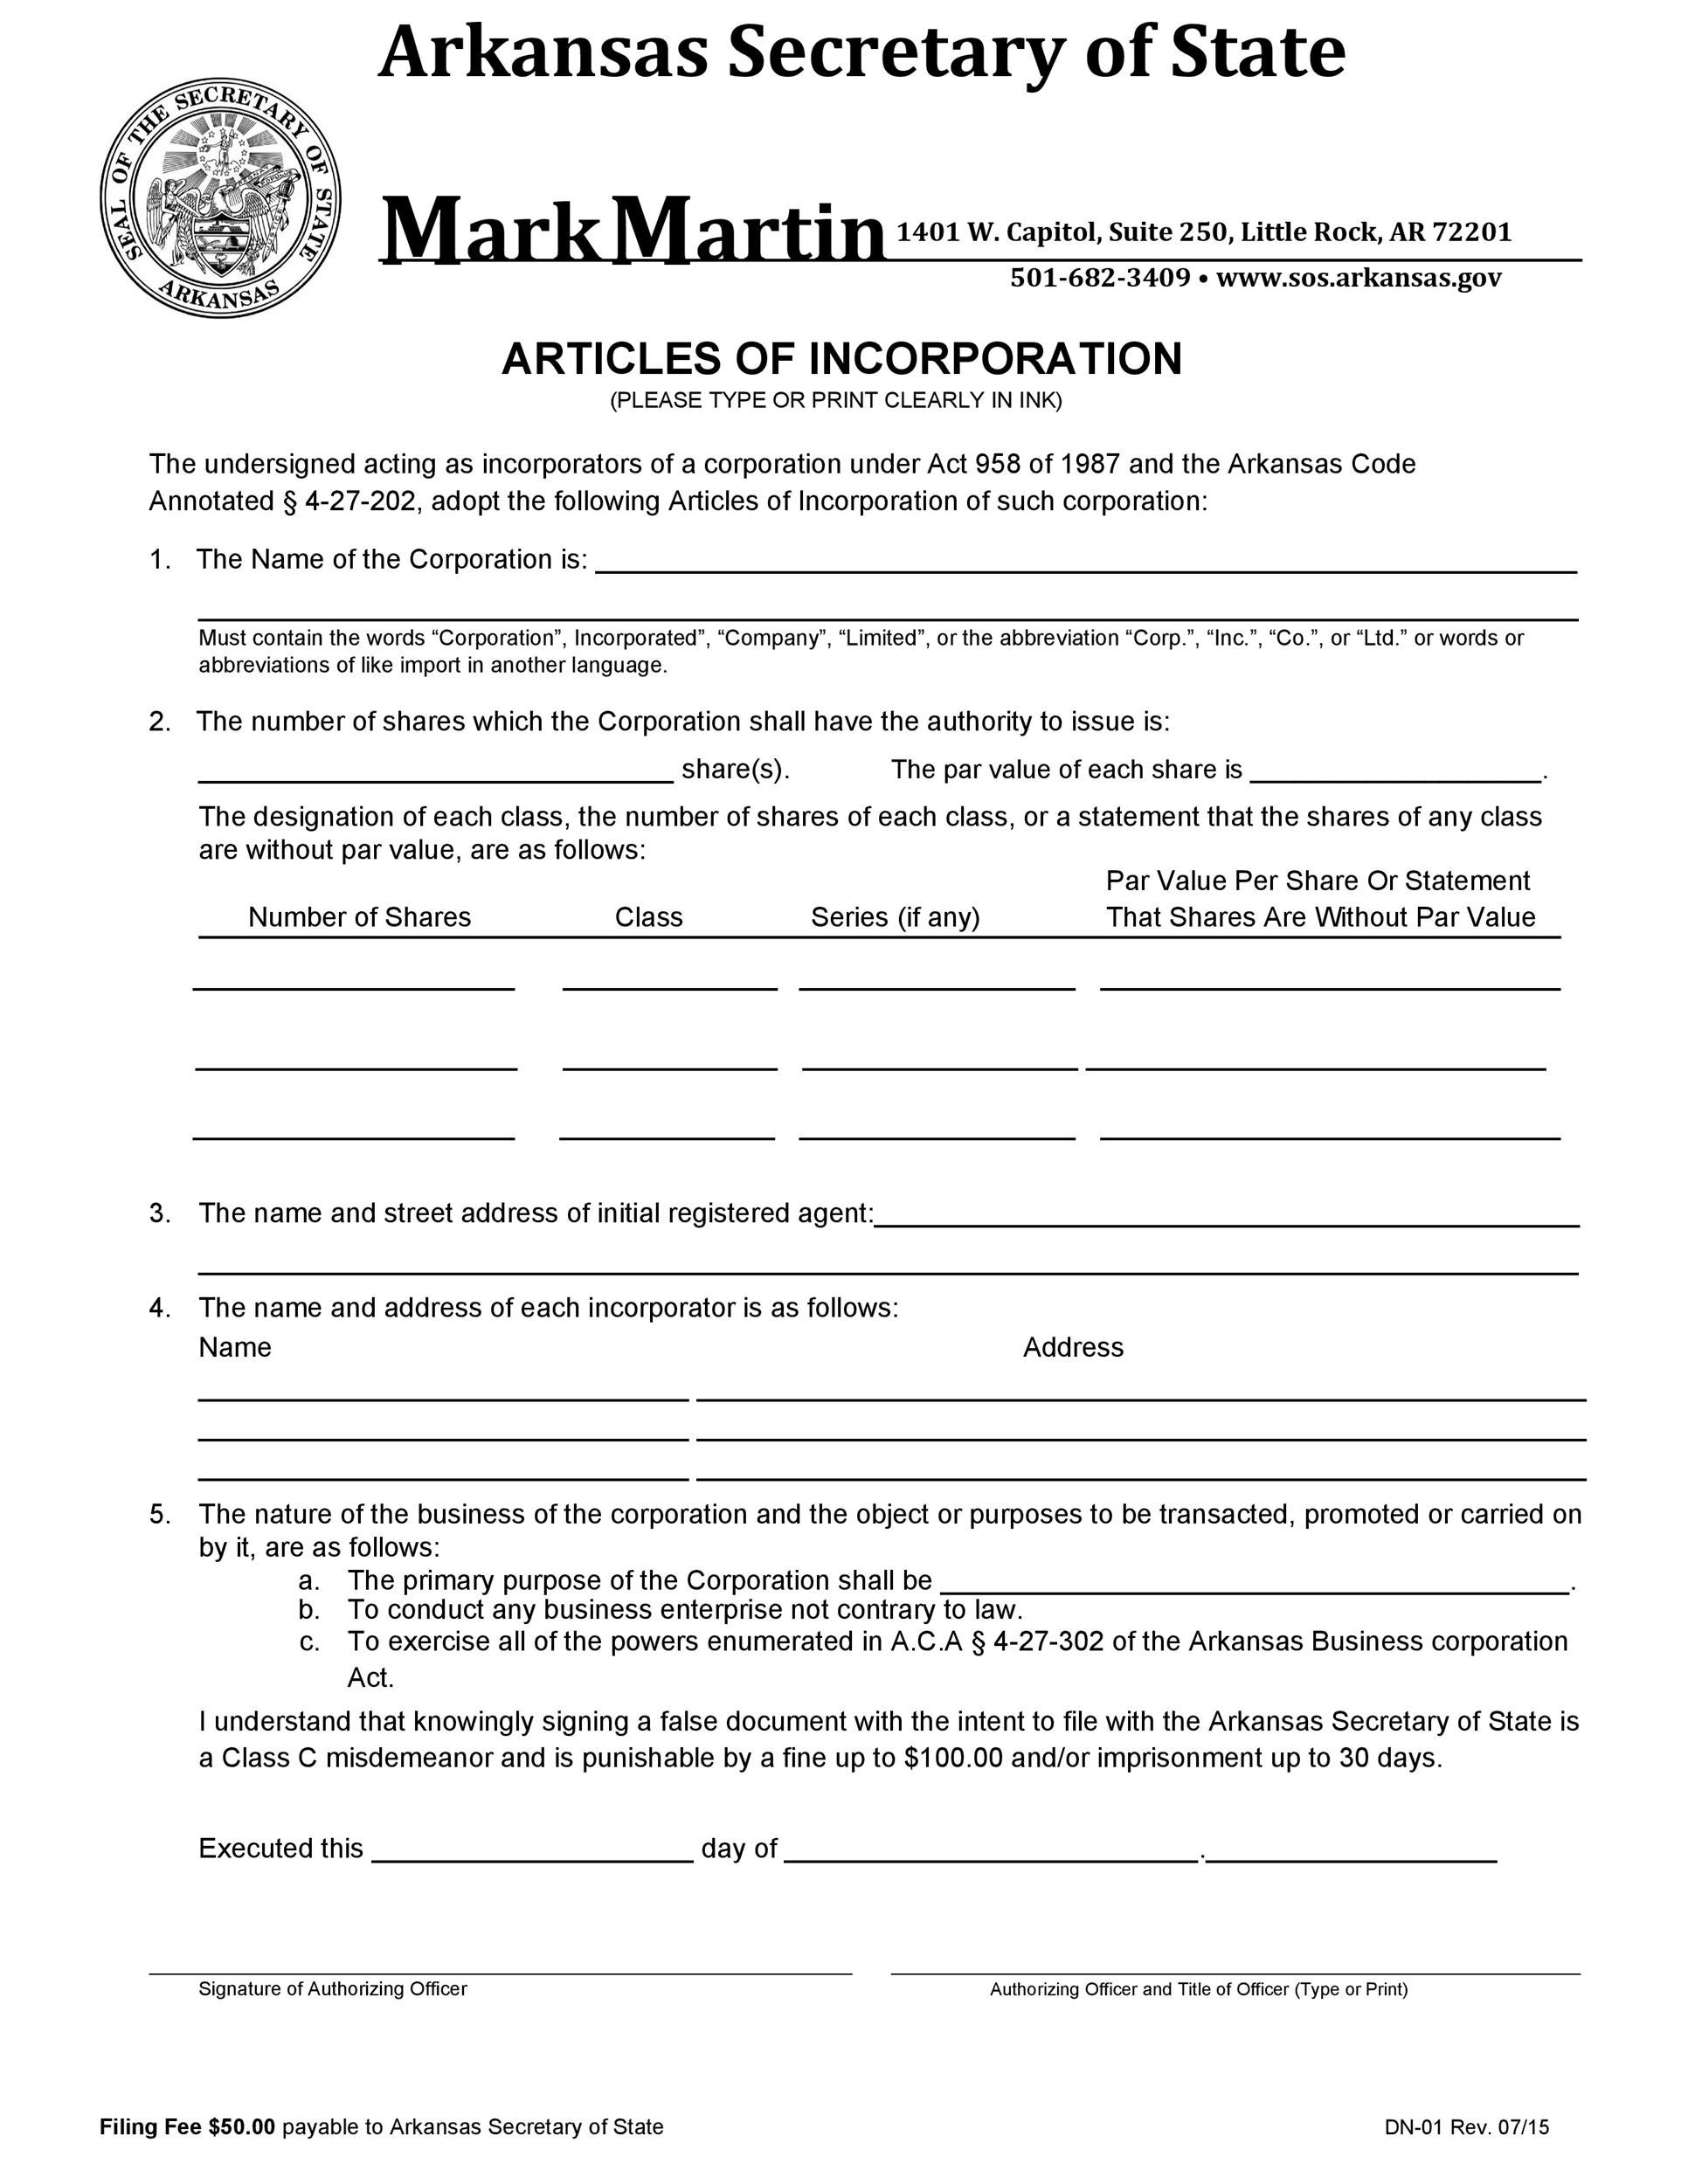 Free articles of incorporation template 32